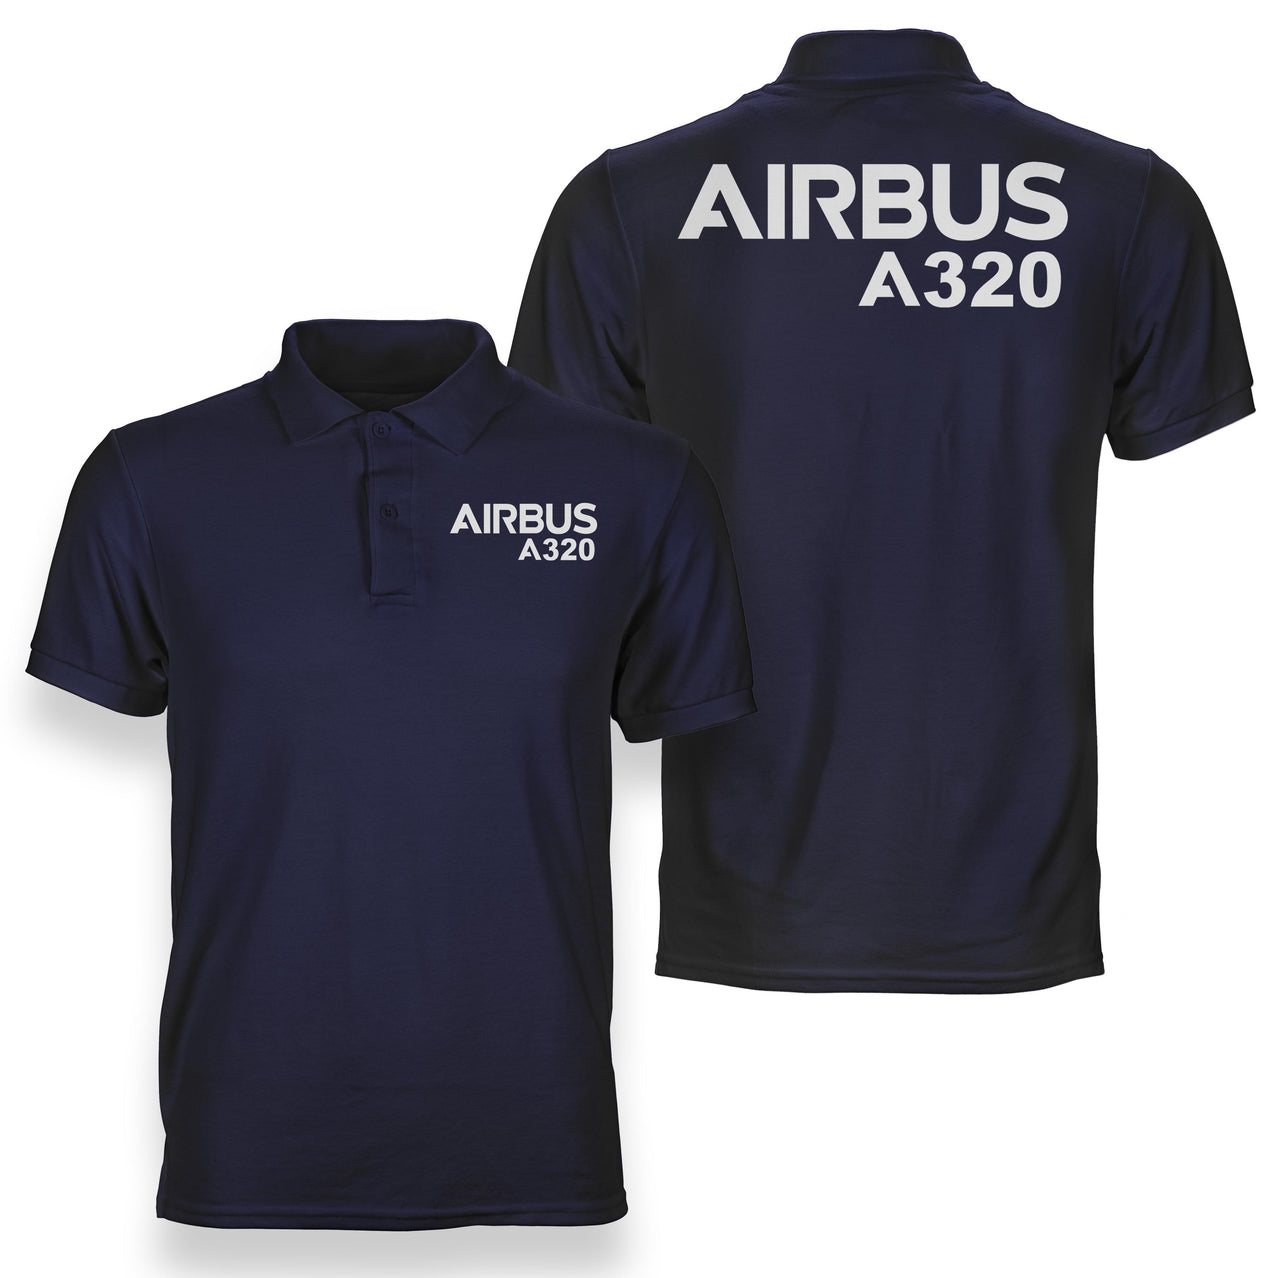 Airbus A320 & Text Designed Double Side Polo T-Shirts